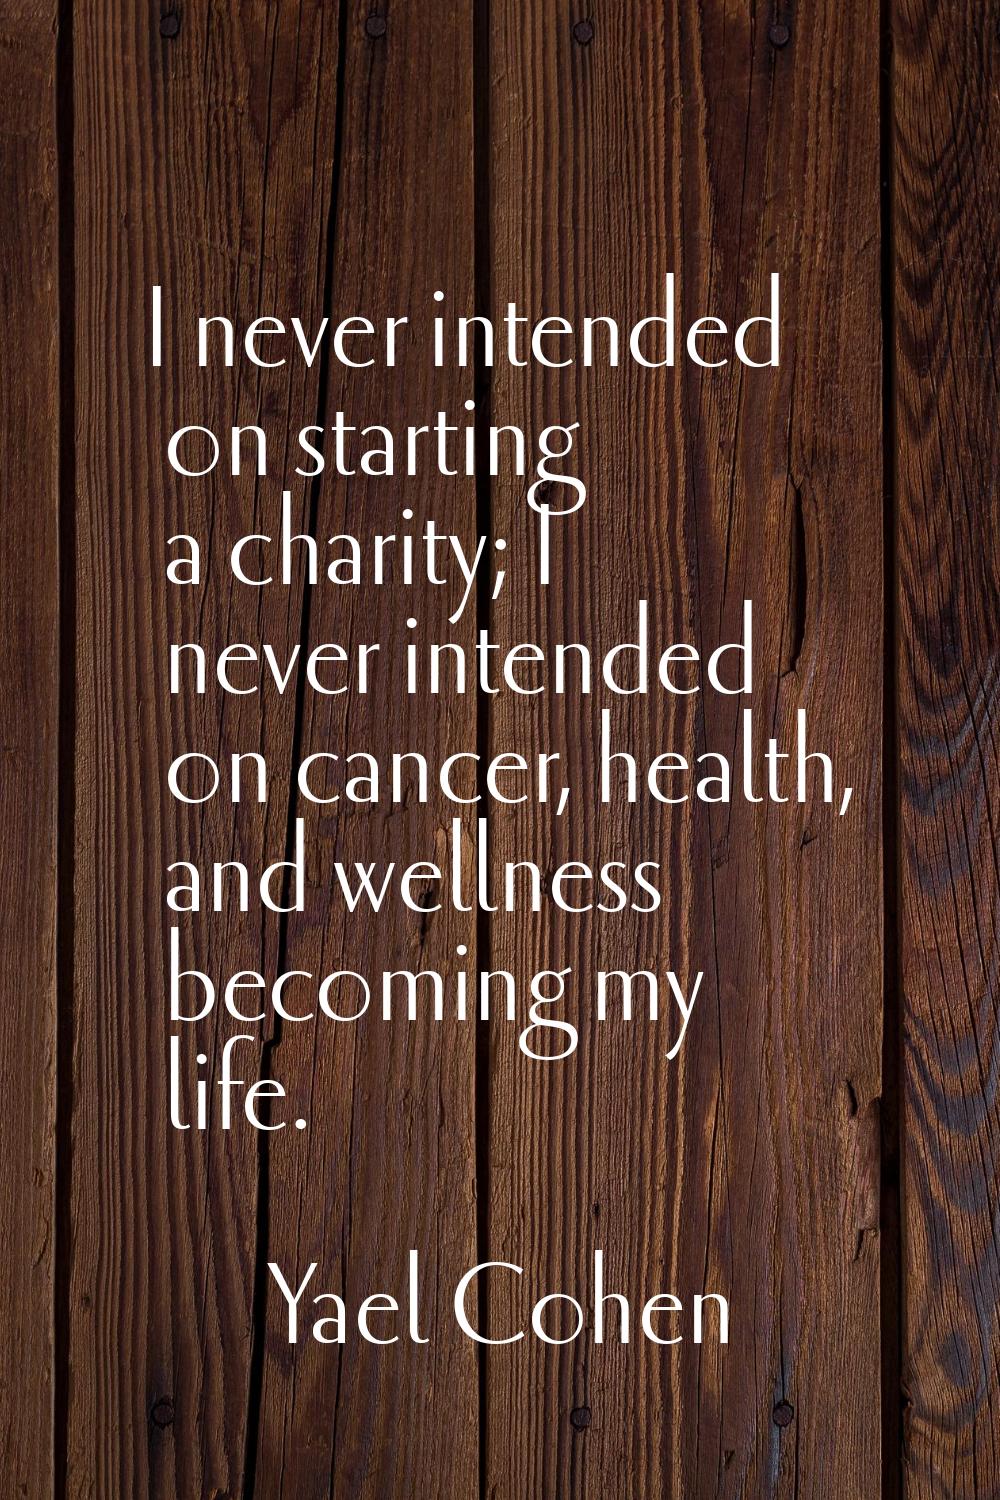 I never intended on starting a charity; I never intended on cancer, health, and wellness becoming m